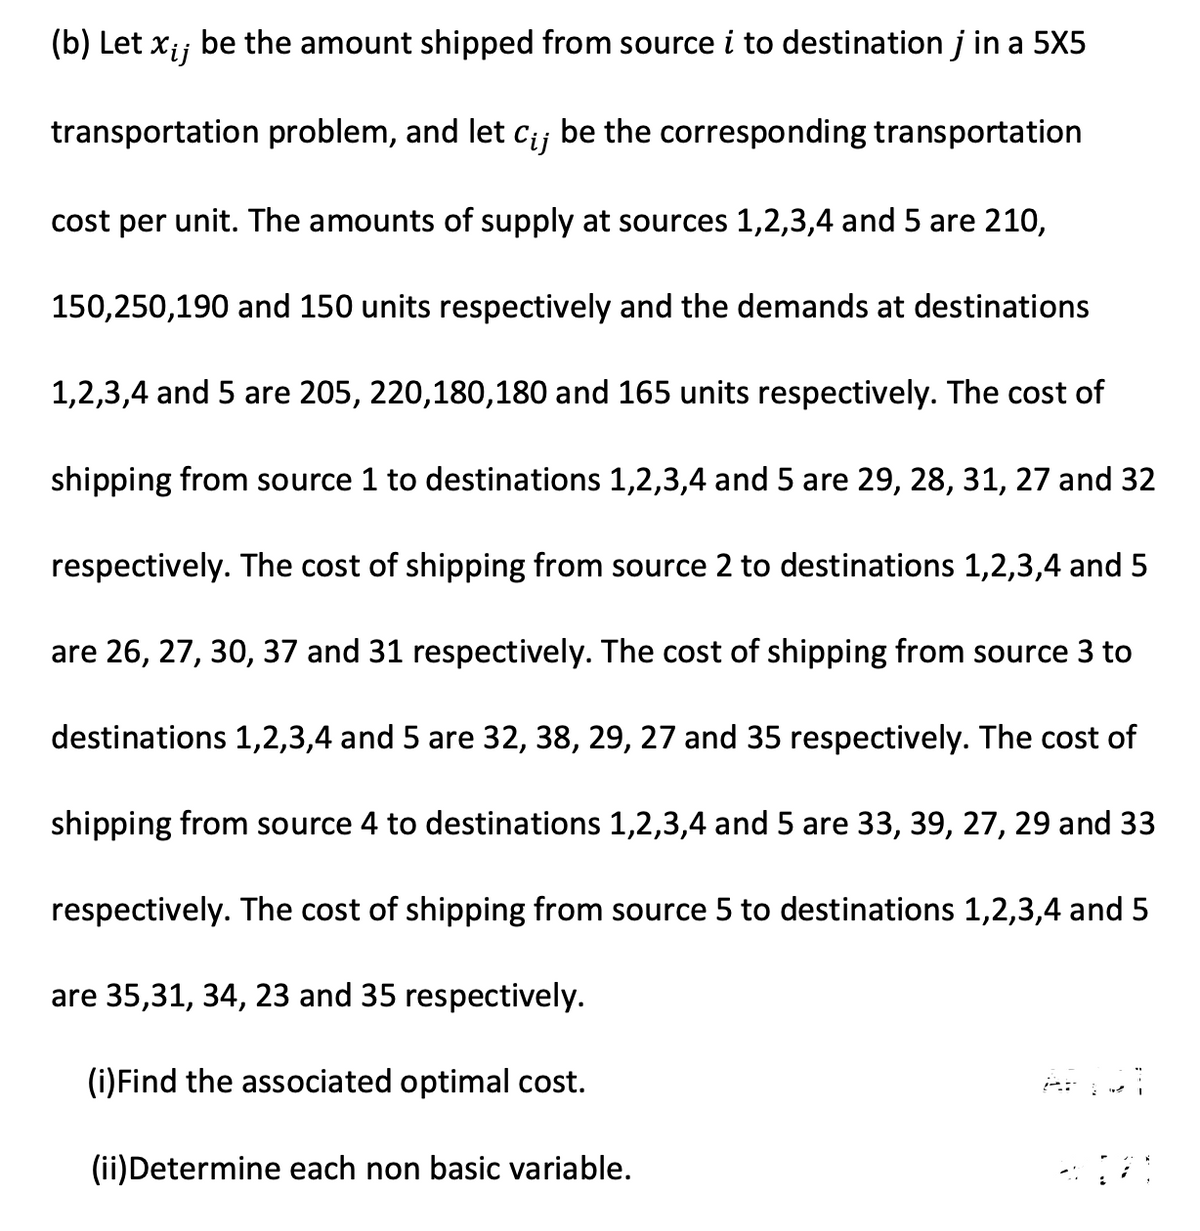 (b) Let xij
be the amount shipped from source i to destination j in a 5X5
transportation problem, and let cij be the corresponding transportation
cost per unit. The amounts of supply at sources 1,2,3,4 and 5 are 210,
150,250,190 and 150 units respectively and the demands at destinations
1,2,3,4 and 5 are 205, 220,180,180 and 165 units respectively. The cost of
shipping from source 1 to destinations 1,2,3,4 and 5 are 29, 28, 31, 27 and 32
respectively. The cost of shipping from source 2 to destinations 1,2,3,4 and 5
are 26, 27, 30, 37 and 31 respectively. The cost of shipping from source 3 to
destinations 1,2,3,4 and 5 are 32, 38, 29, 27 and 35 respectively. The cost of
shipping from source 4 to destinations 1,2,3,4 and 5 are 33, 39, 27, 29 and 33
respectively. The cost of shipping from source 5 to destinations 1,2,3,4 and 5
are 35,31, 34, 23 and 35 respectively.
(i)Find the associated optimal cost.
(ii)Determine each non basic variable.
